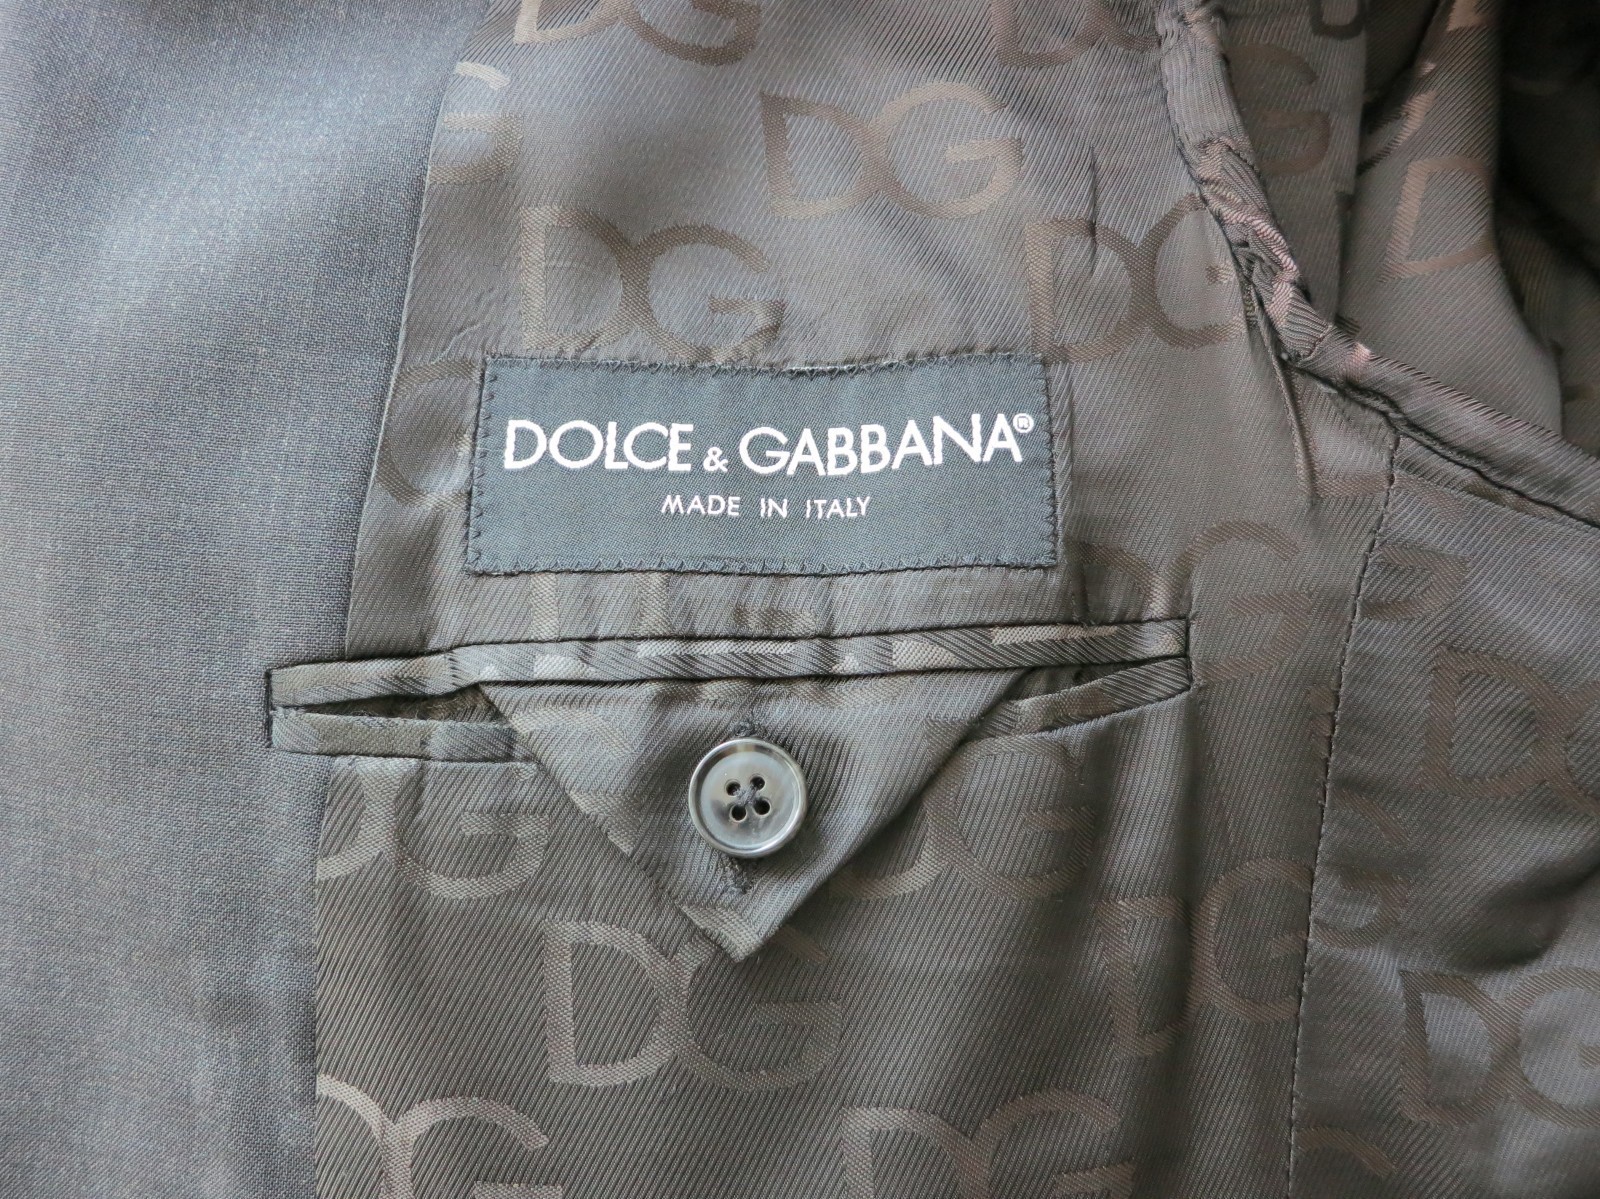 Are most Dolce & Gabbana suits INCREDIBLY small in sizes? | Styleforum